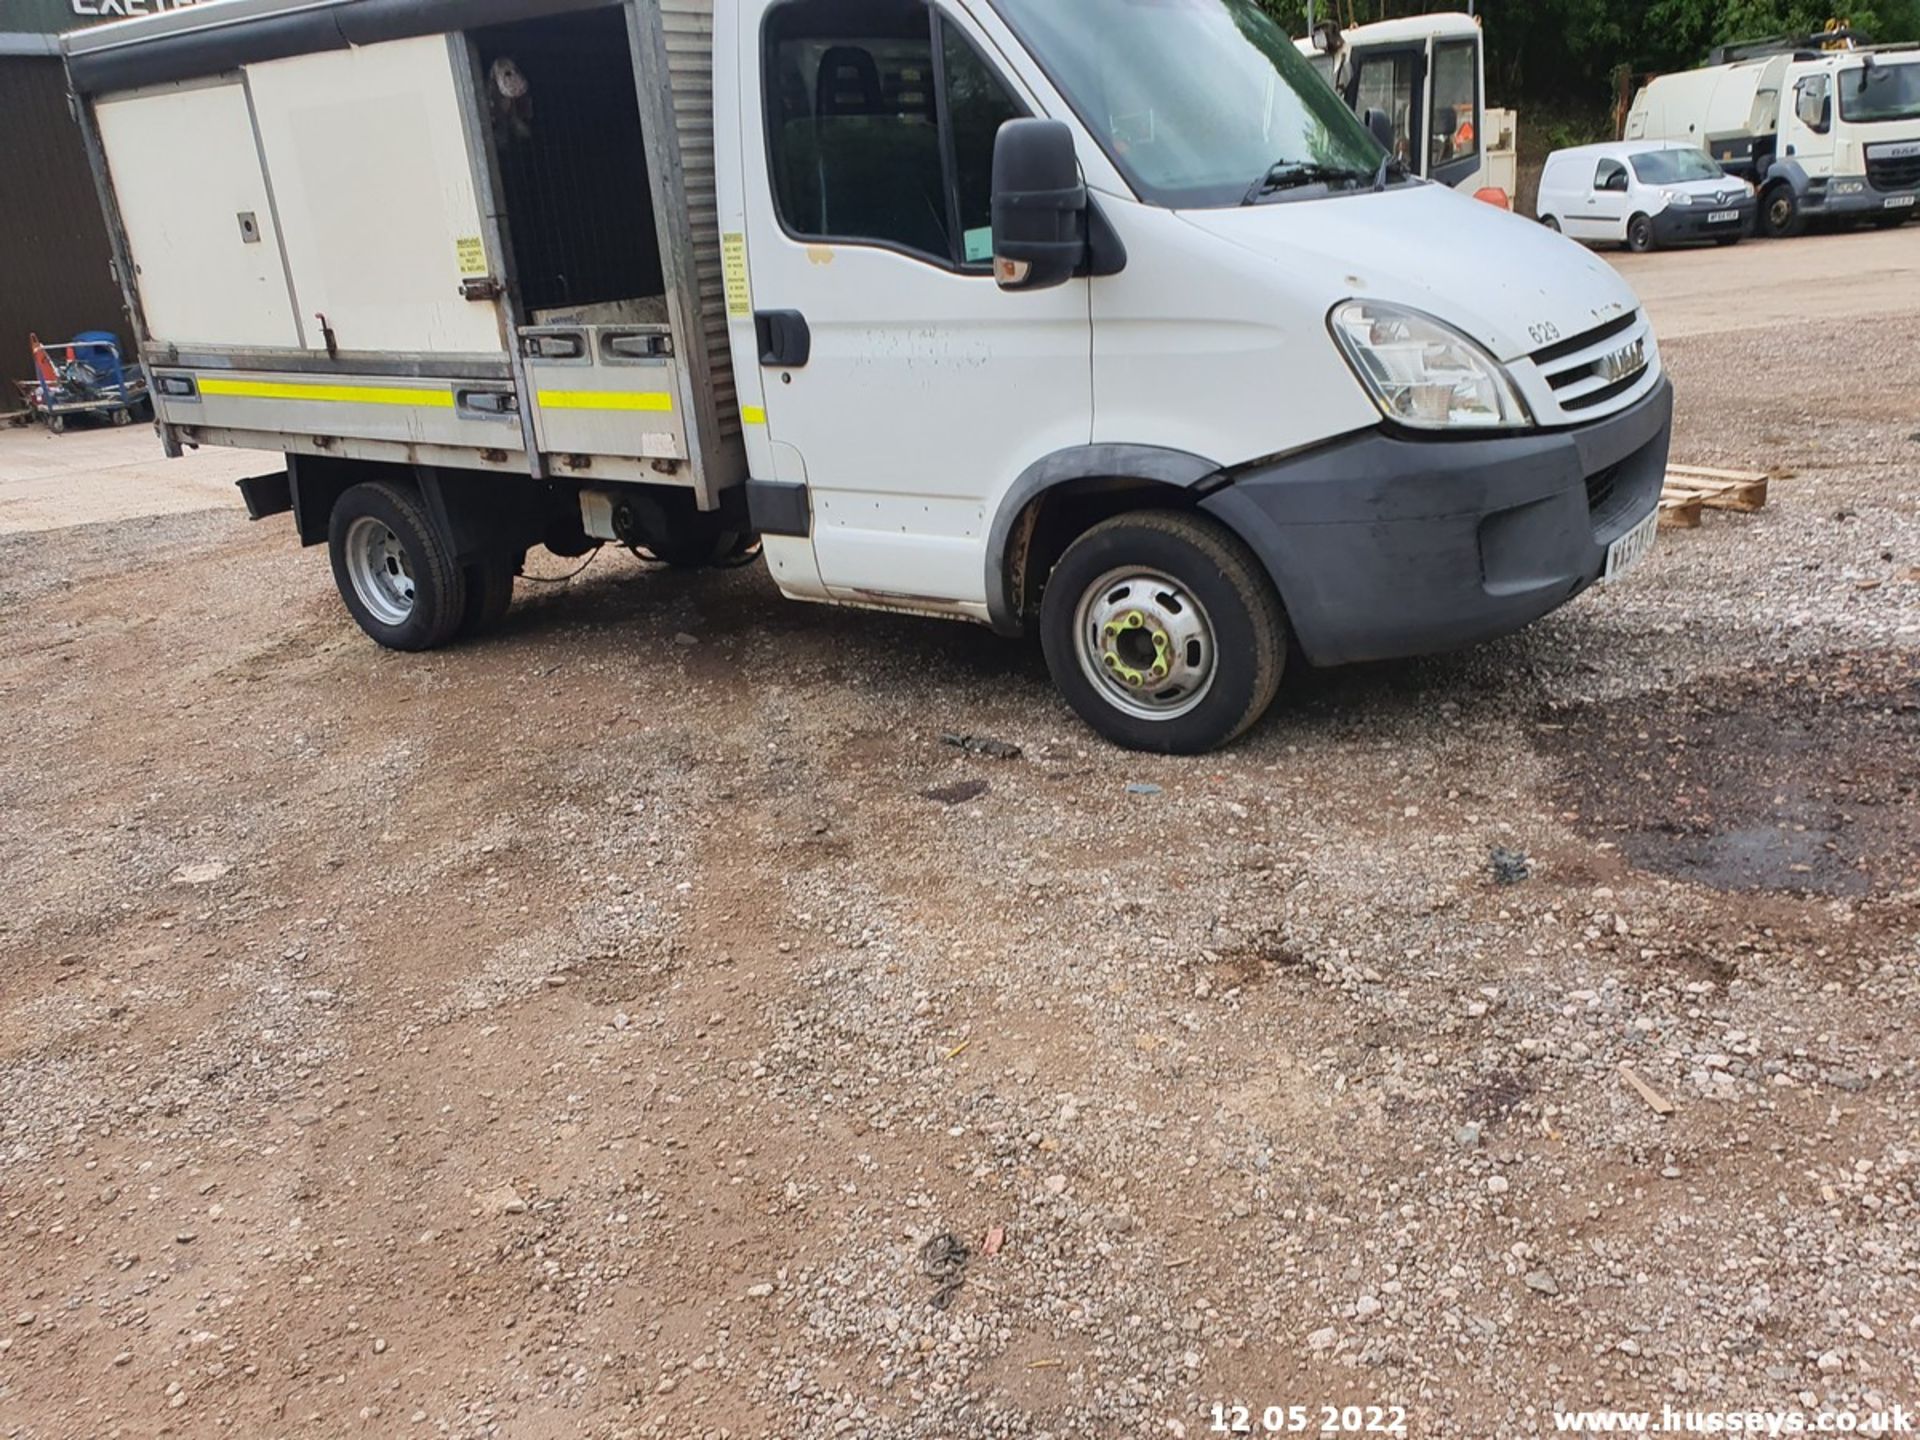 07/57 IVECO DAILY 35C15 MWB - 2998cc 2dr Tipper (White, 212k) - Image 3 of 21